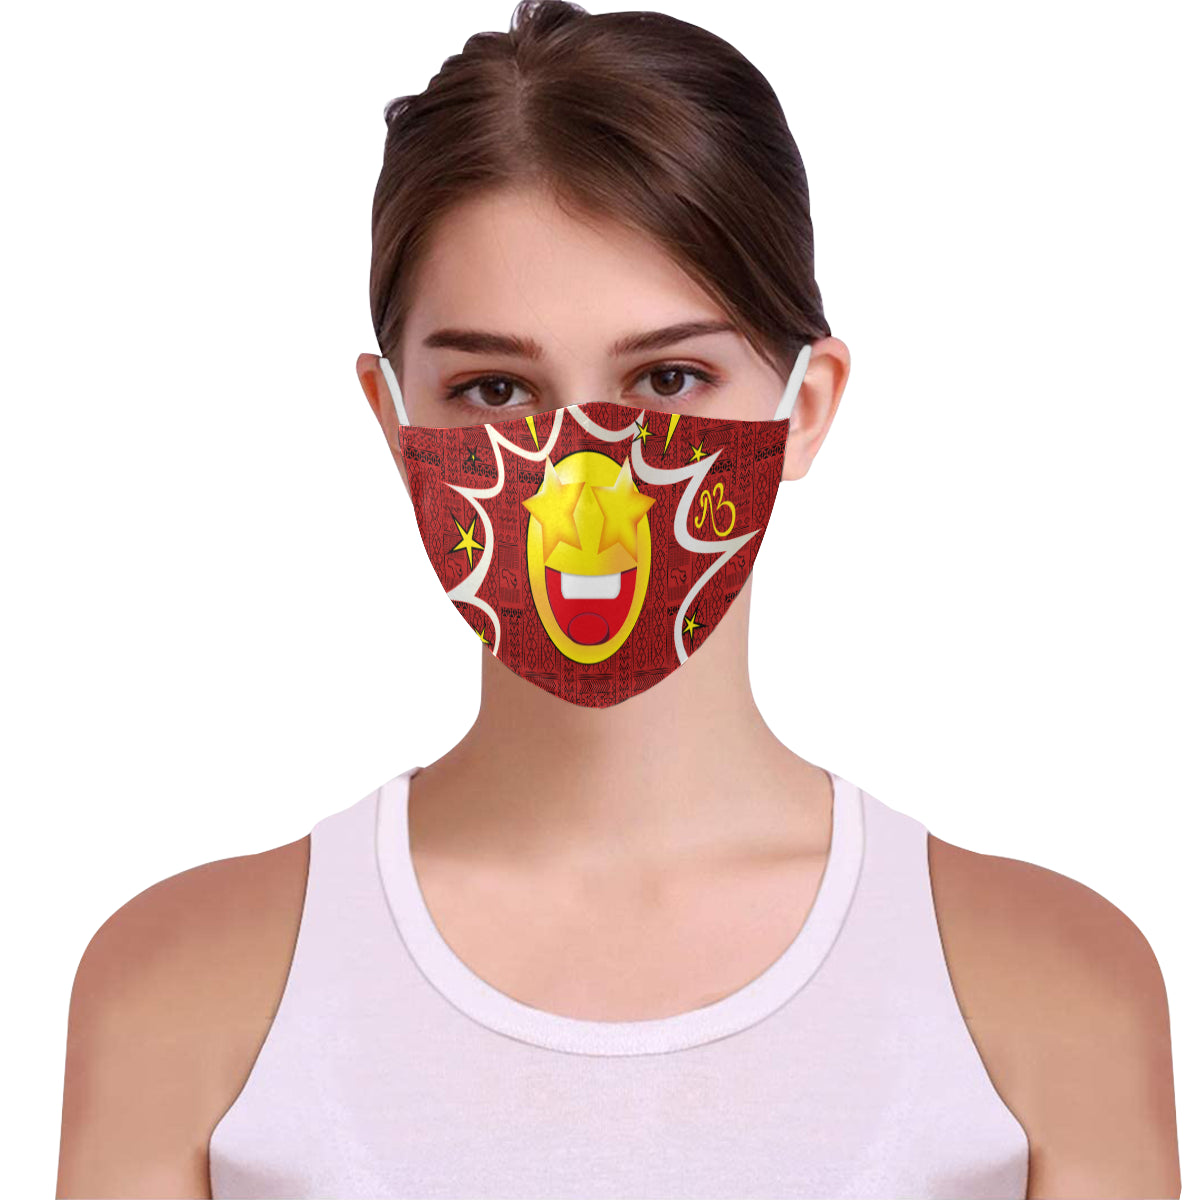 Star Tribal Print Comic Emoji Cotton Fabric Face Mask with Filter Slot and Adjustable Strap - Non-medical use (2 Filters Included)